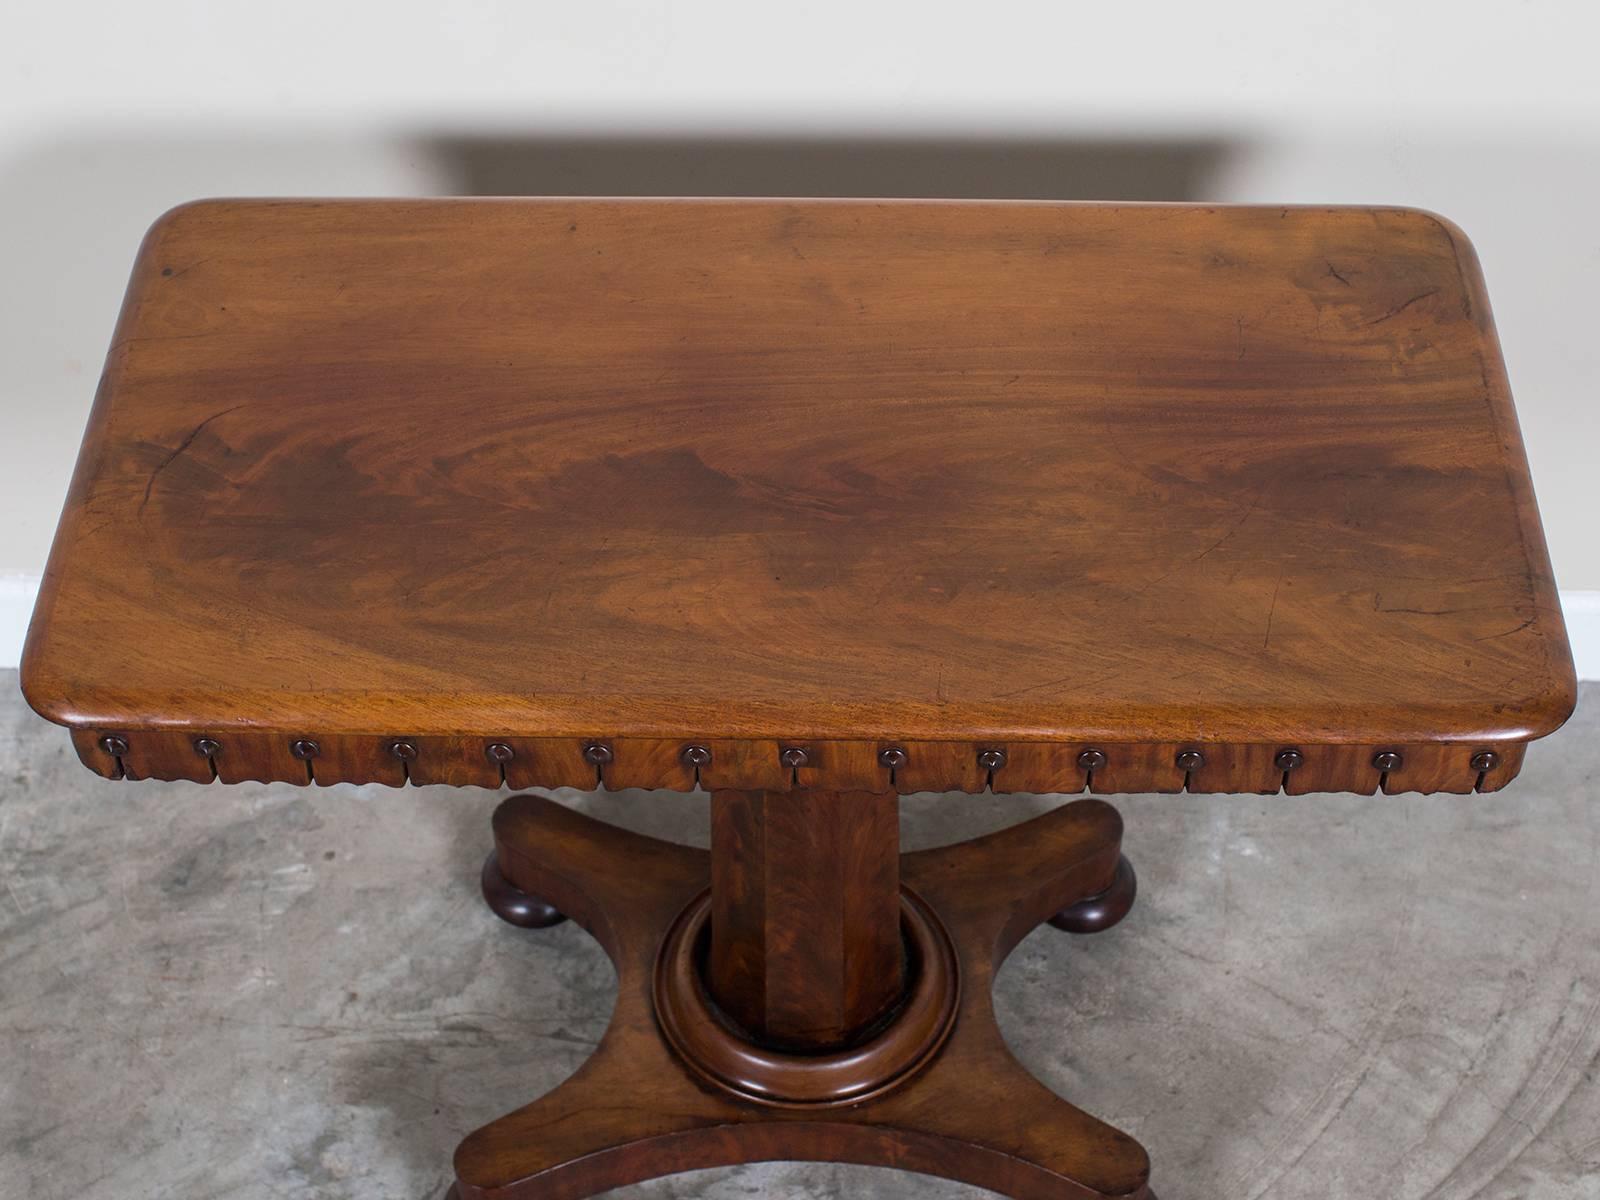 Receive our new selections direct from 1stdibs by email each week. Please click on “Follow Dealer” button below and see them first!

The unusual design of this antique English mahogany table, circa 1835 dates it to the William IV period. Please